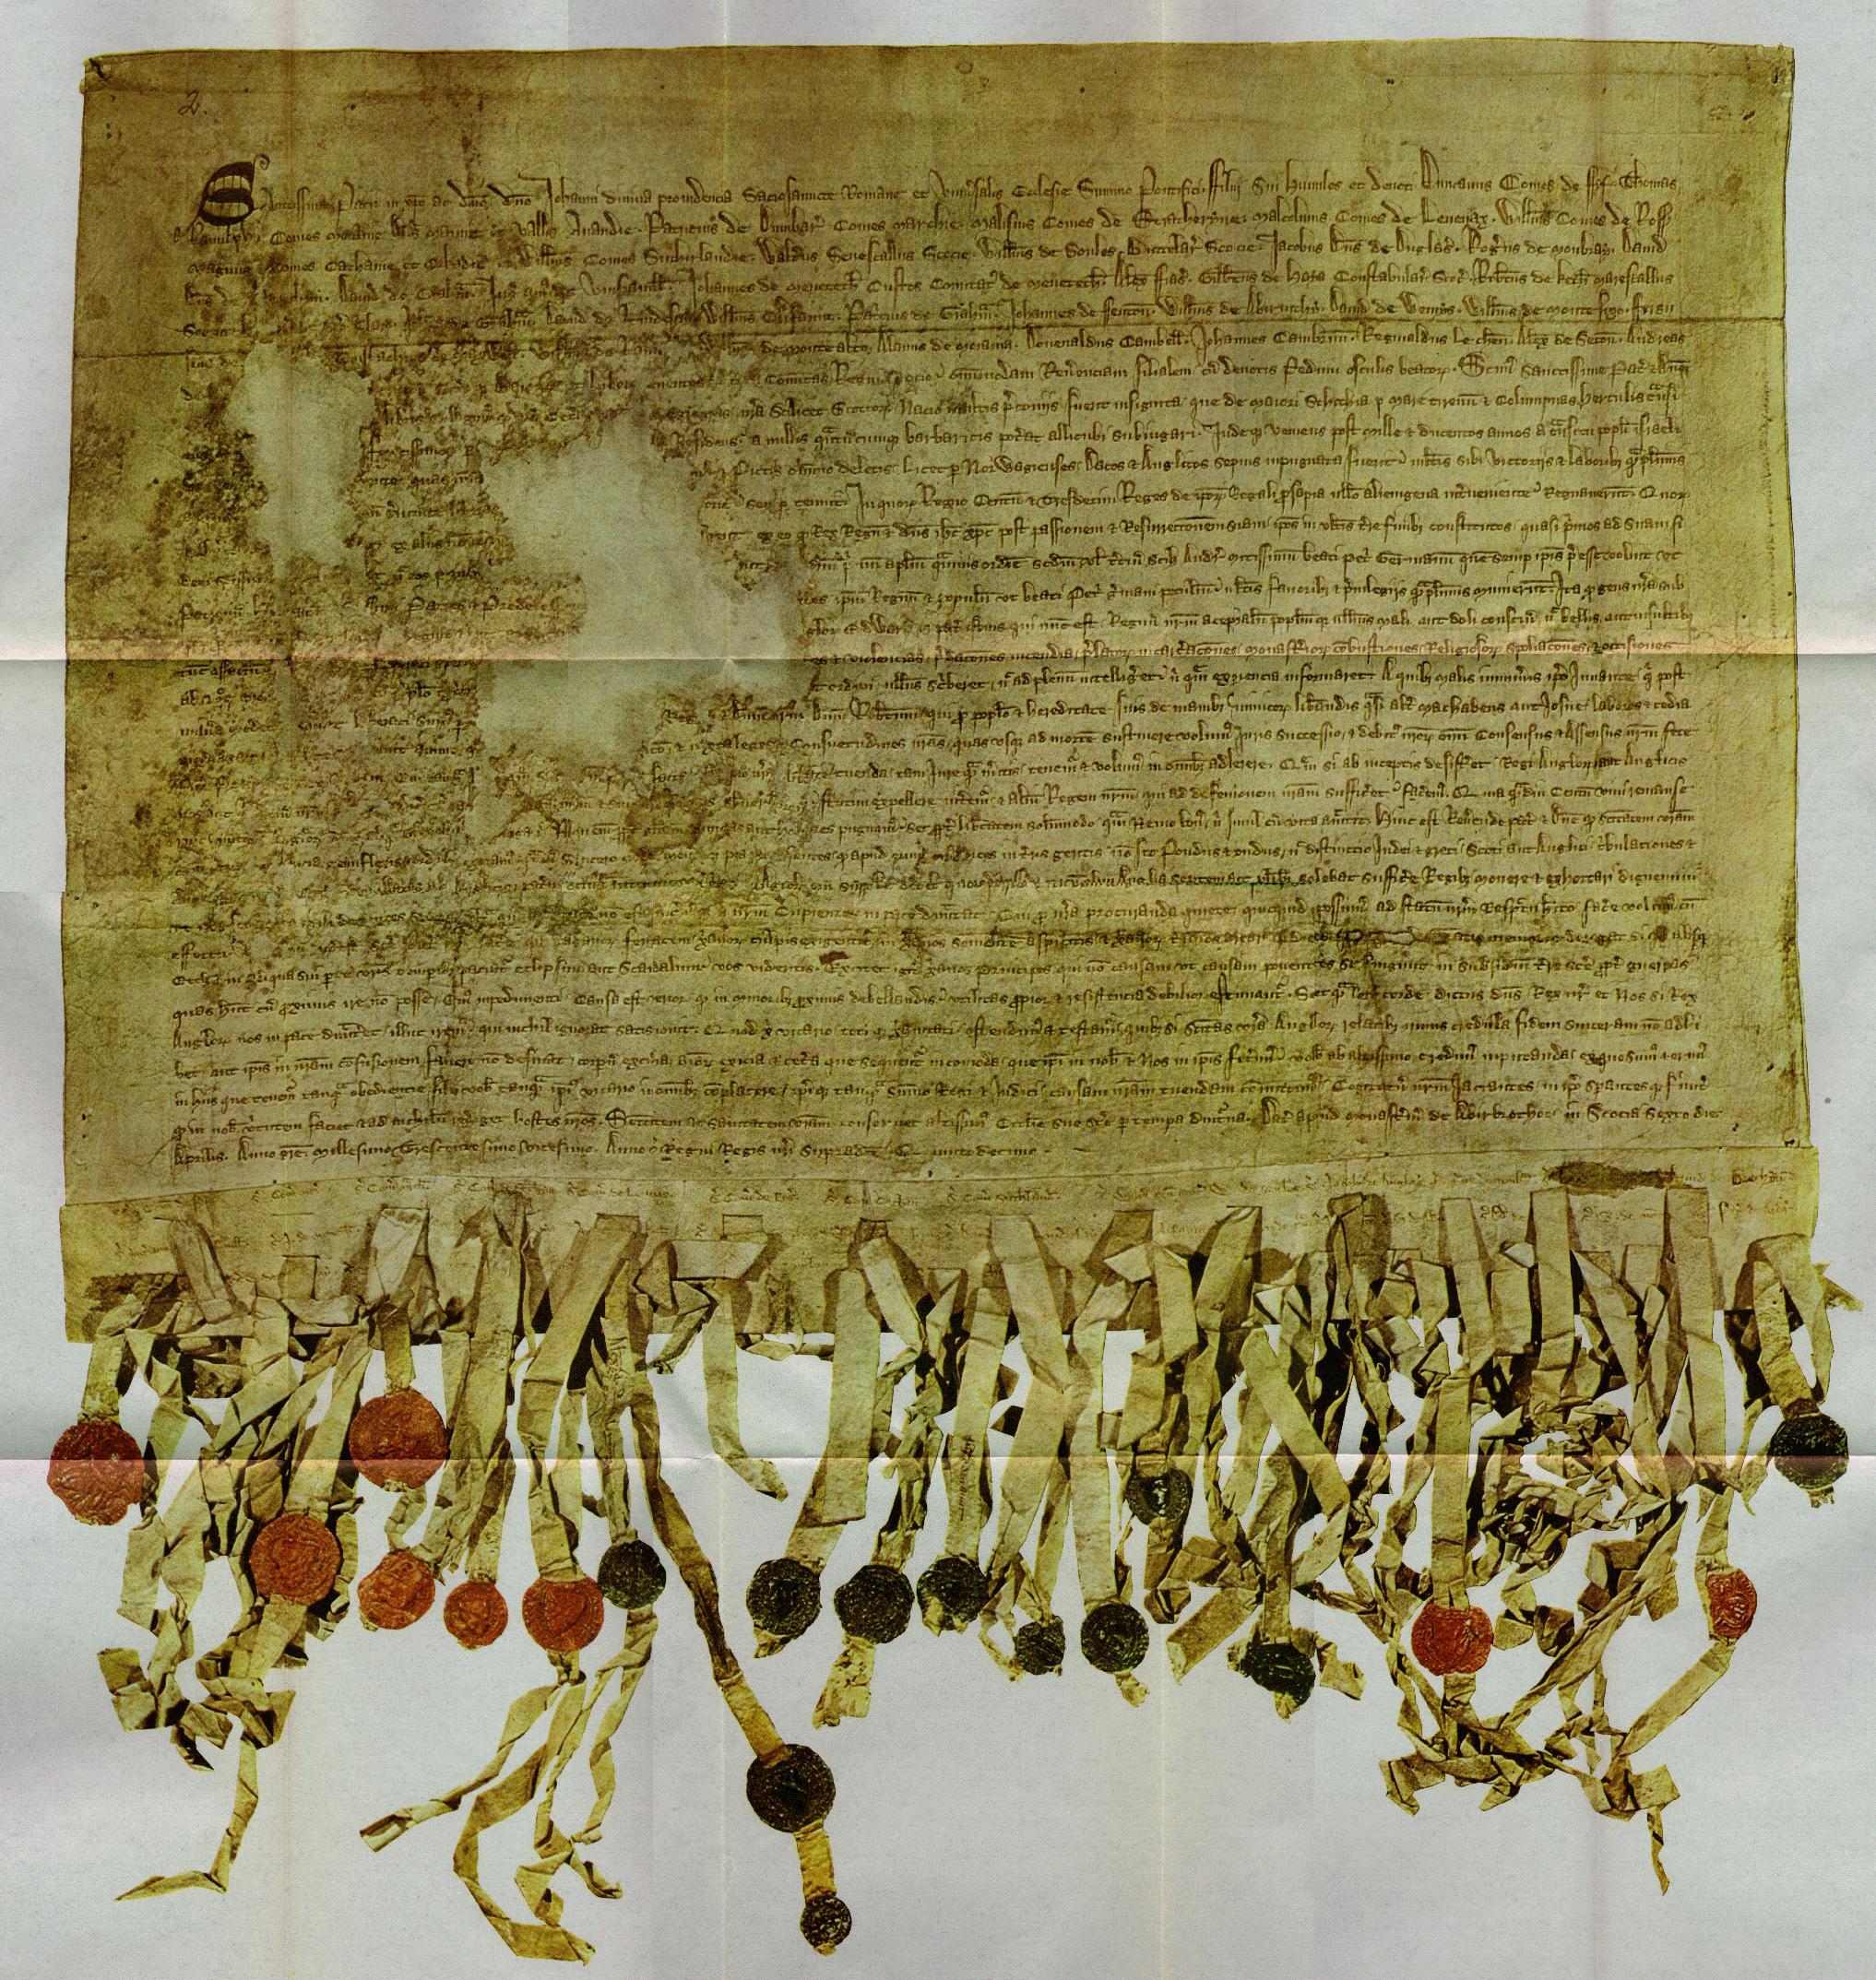 Reproduction of the "Tyninghame" (1320 A.D) copy of the Declaration of Arbroath. 1320 (manuscript): Author: Scotland barons. Public Domain.